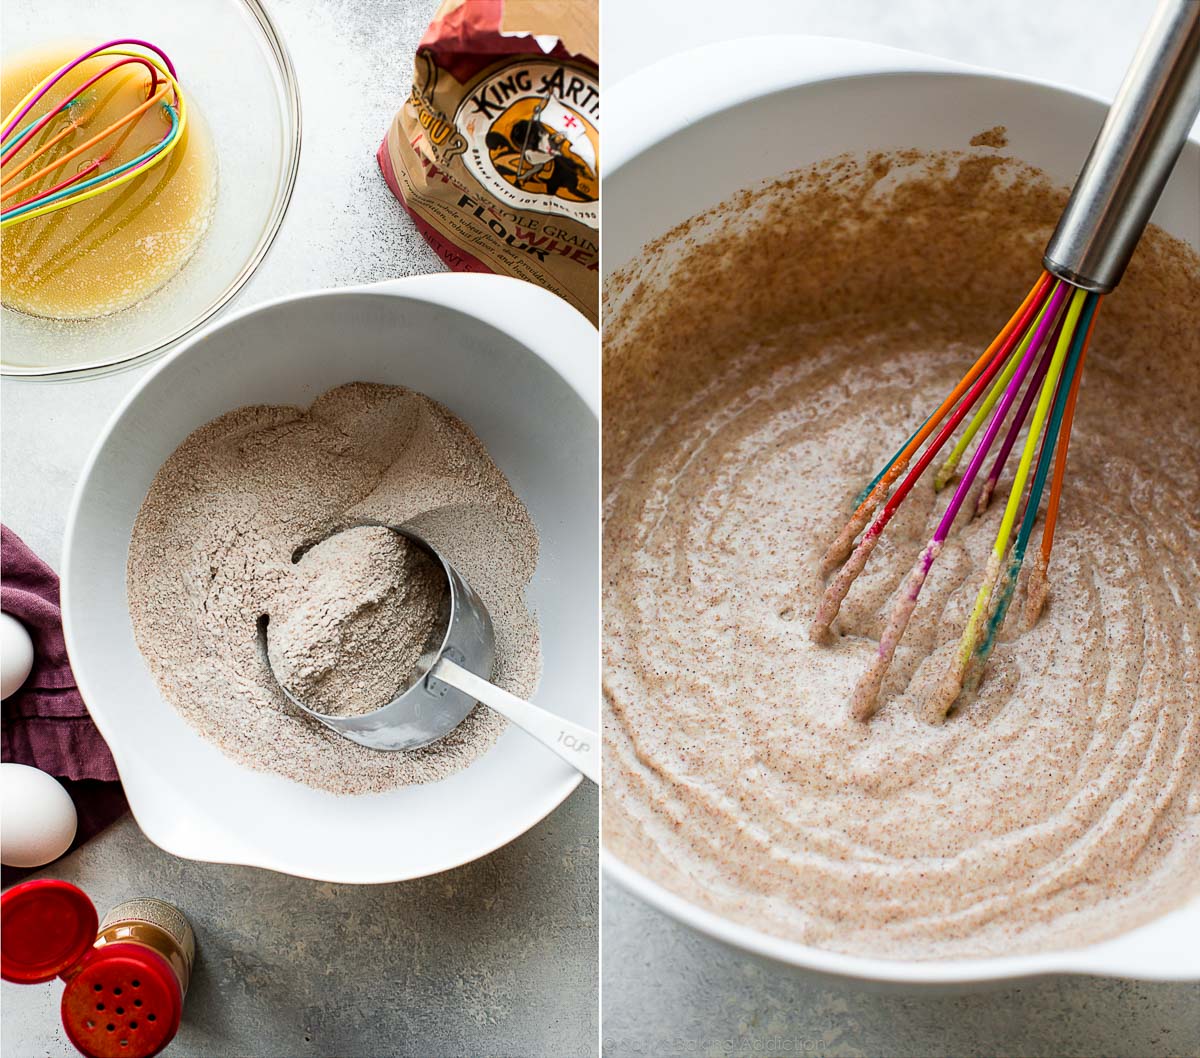 2 images of ingredients for whole wheat waffles in bowls and whole wheat waffle batter in a white bowl